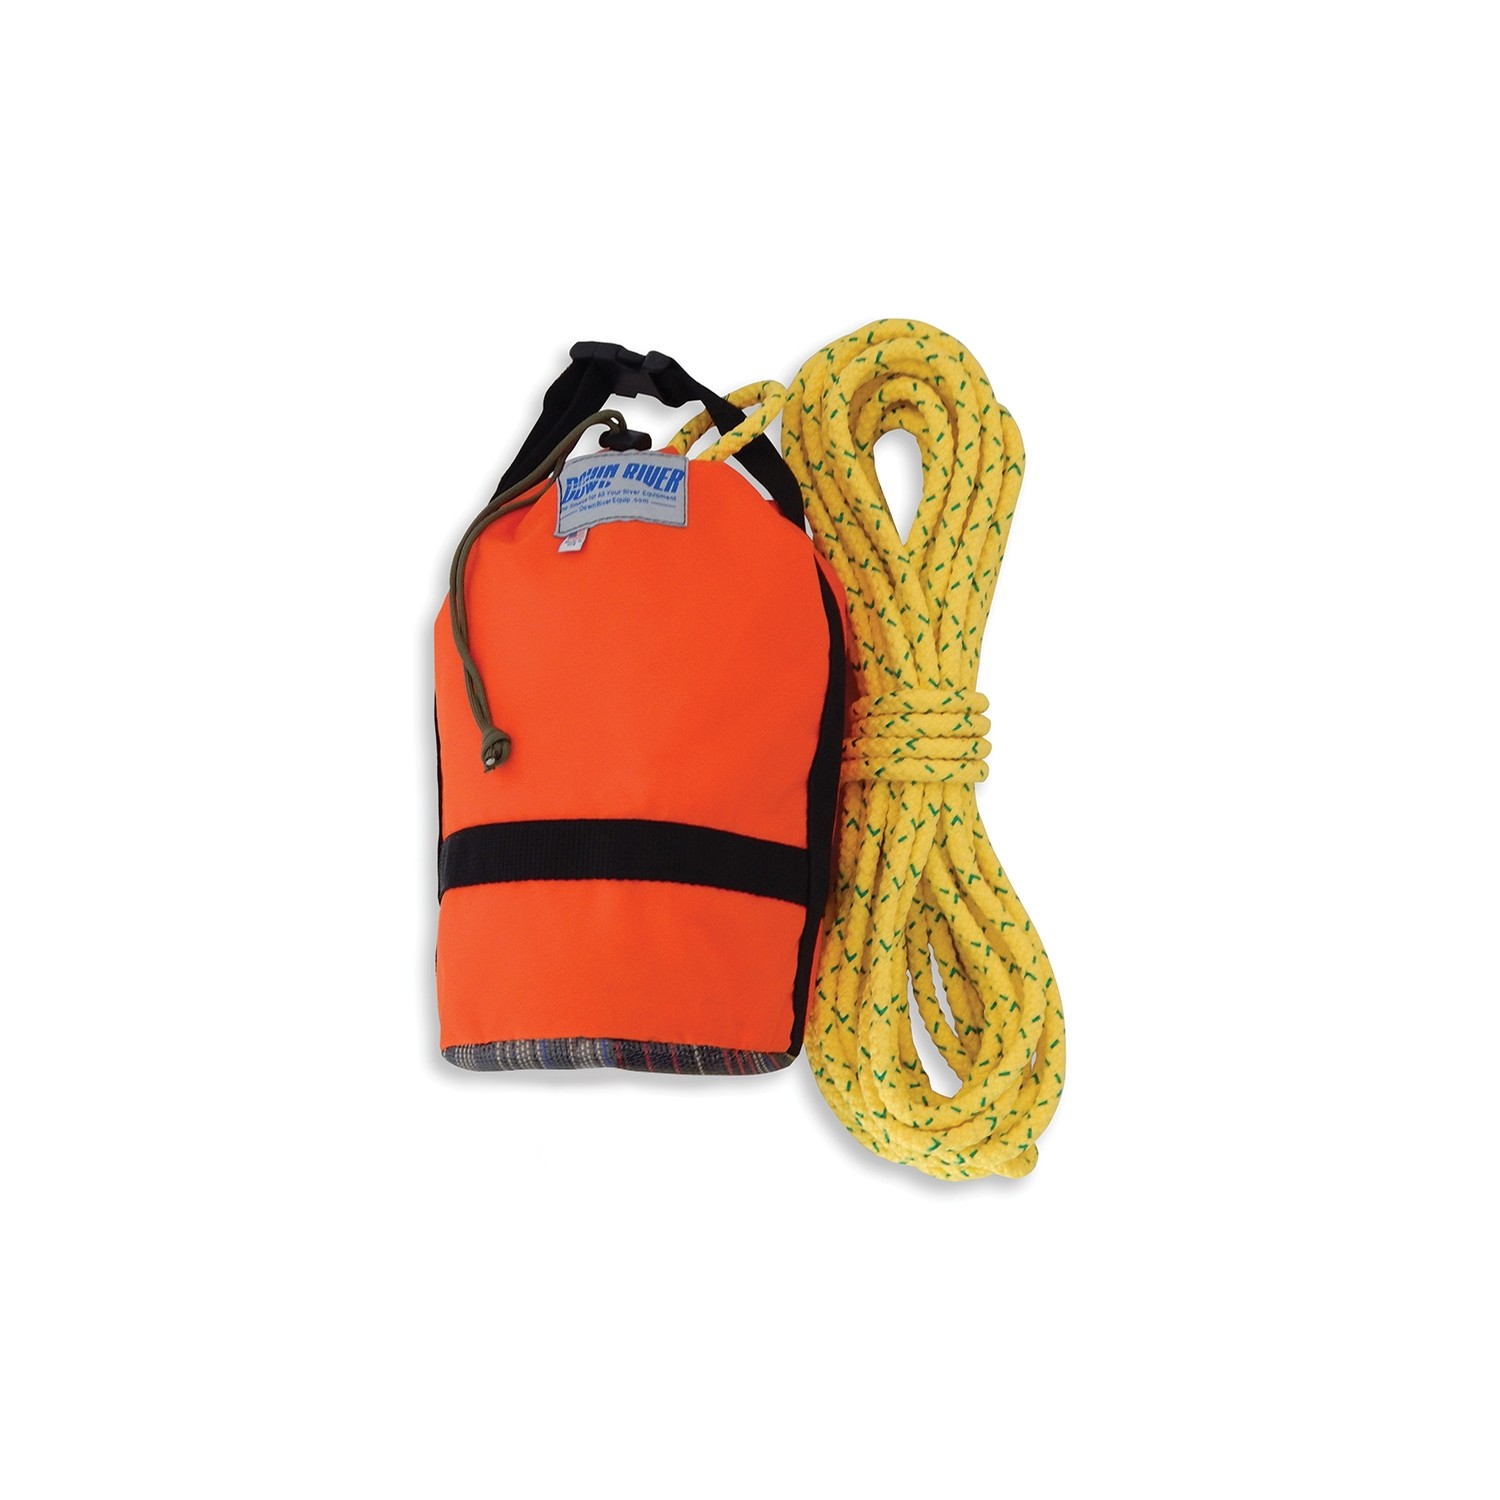 Buy NTR Water Rescue Throw Bag with 50/70/98 Feet of Rope in 3/10 Inch  Tensile Strength Rated to 1844lbs, Throwable Device for Kayaking and  Rafting, Safety Equipment for Raft and Boat Online